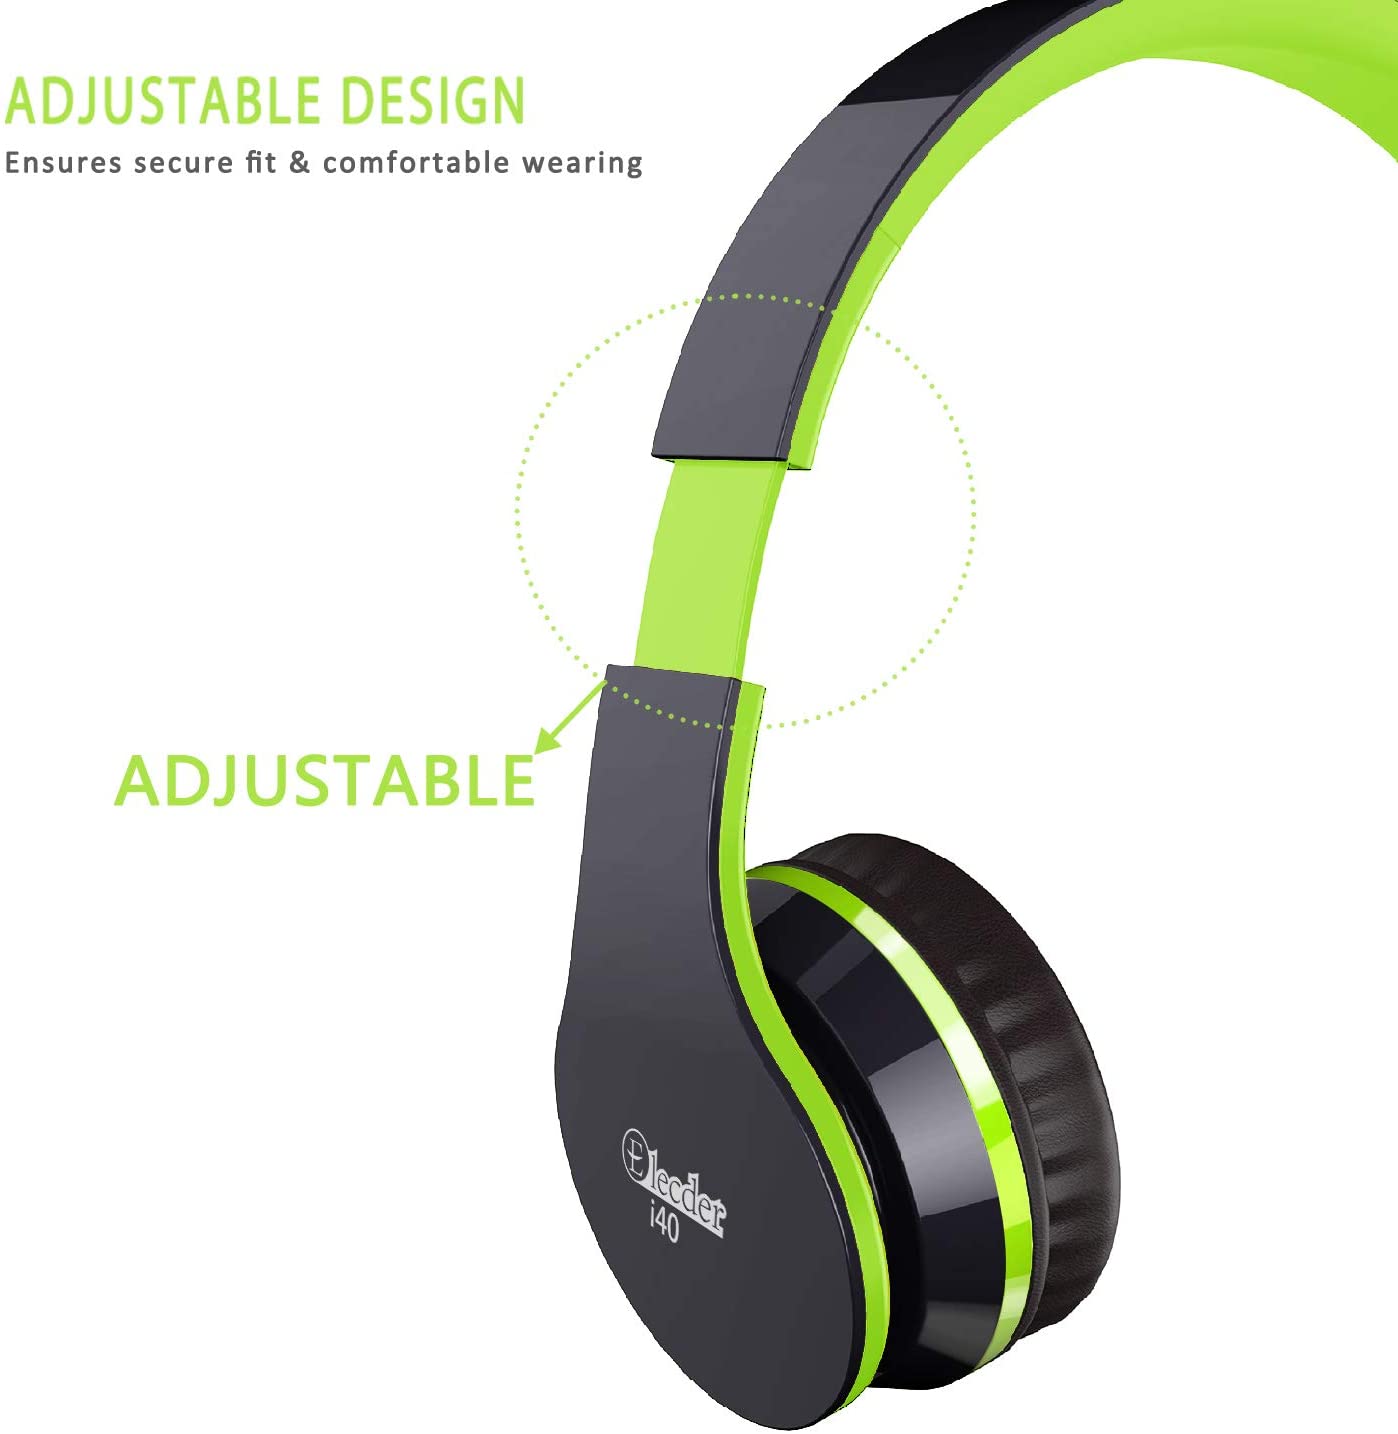 Elecder i40 Headphones with Microphone Green And Blue